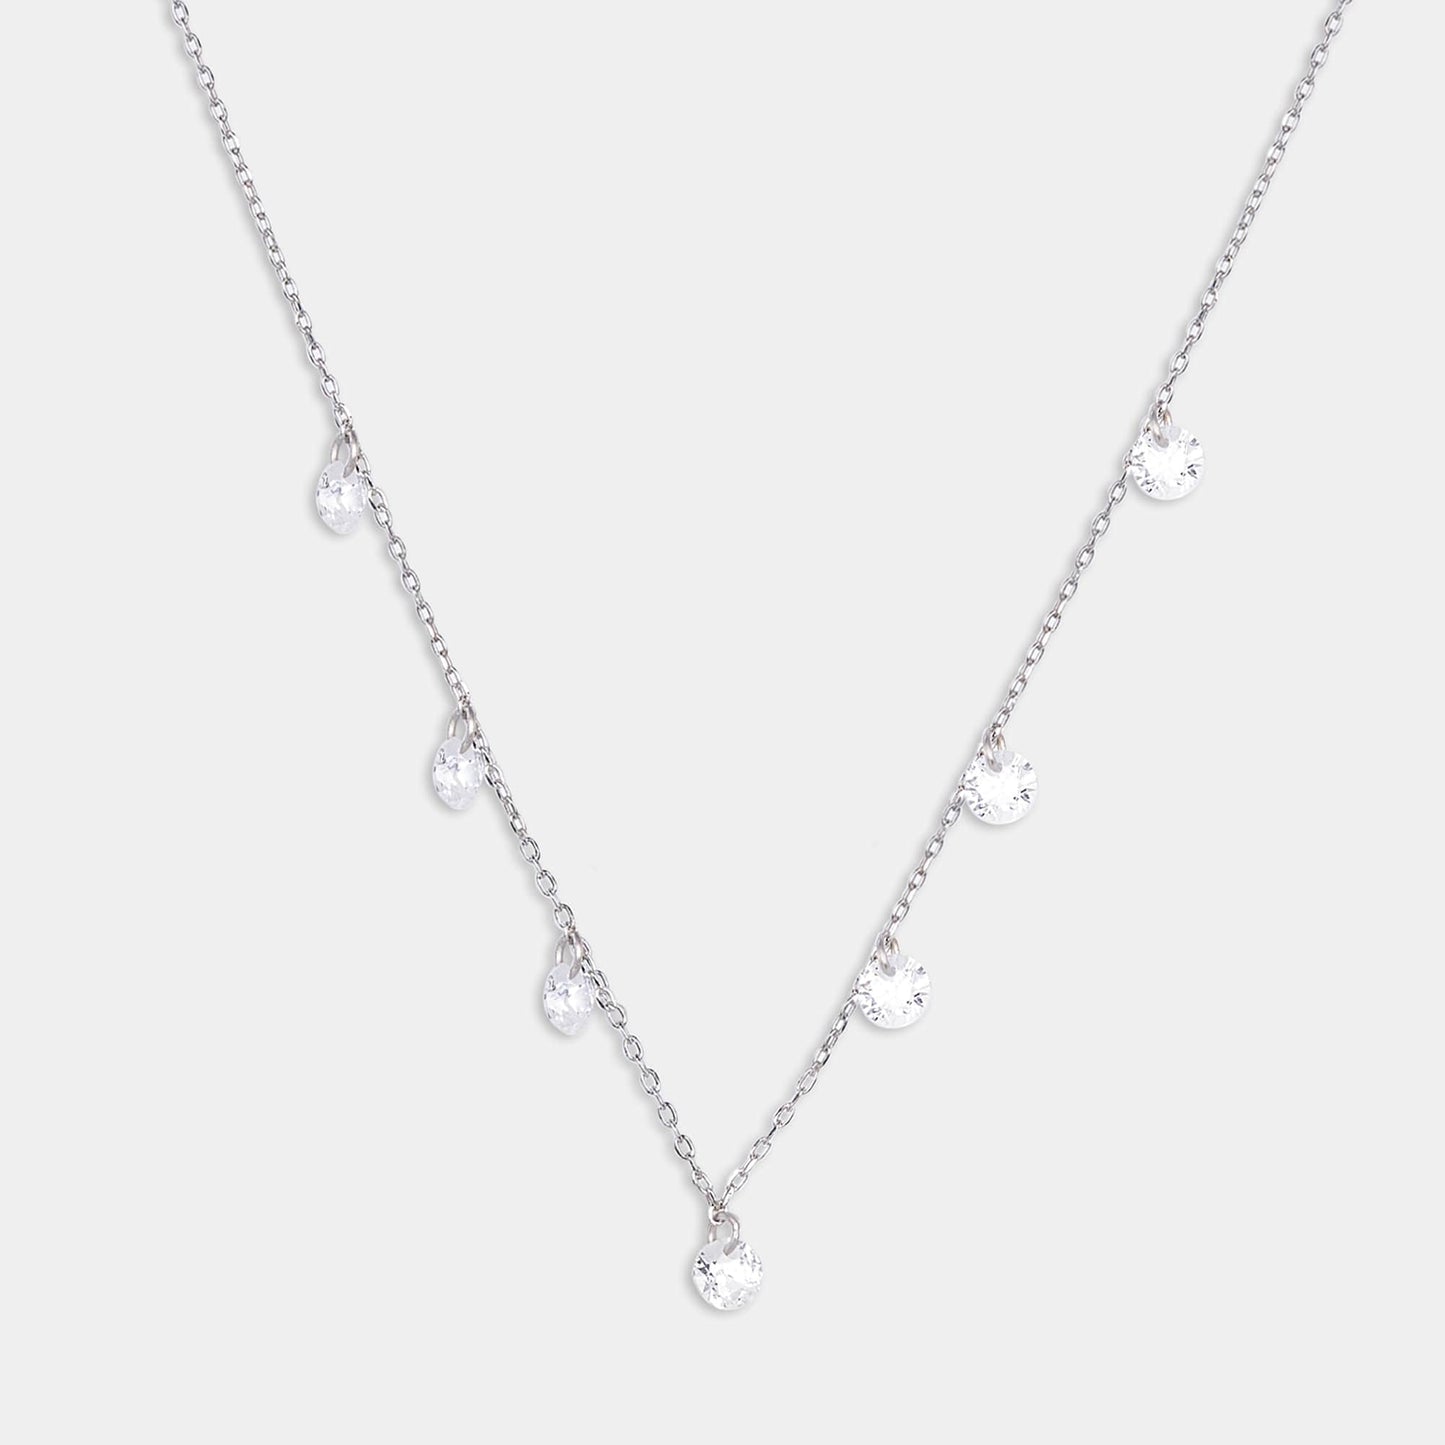 A dazzling sterling silver necklace adorned with delicate white stones, adding a touch of elegance to any outfit.